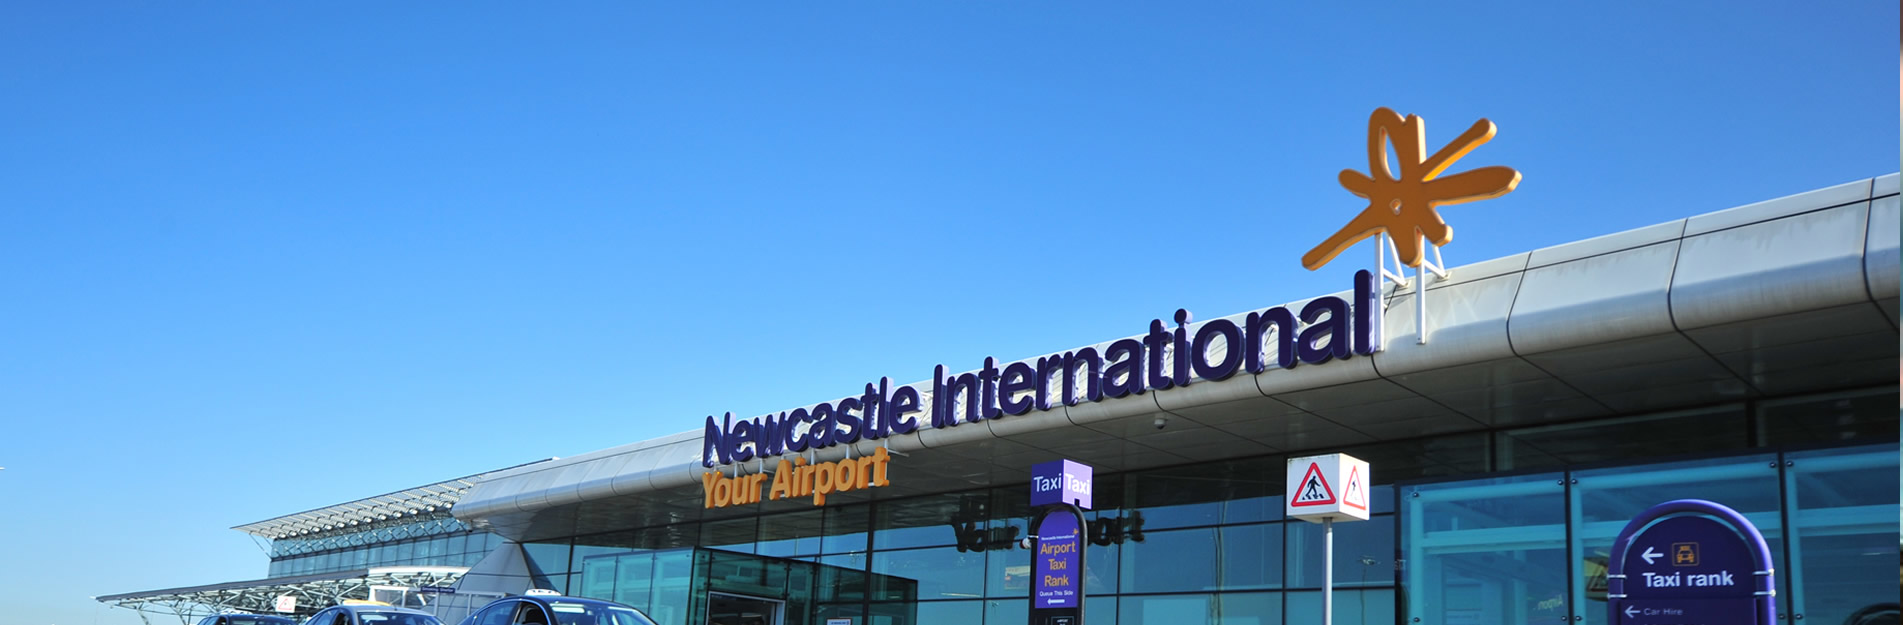 Festive holidays and families reunited -  It’s Christmas at Newcastle International Airport!